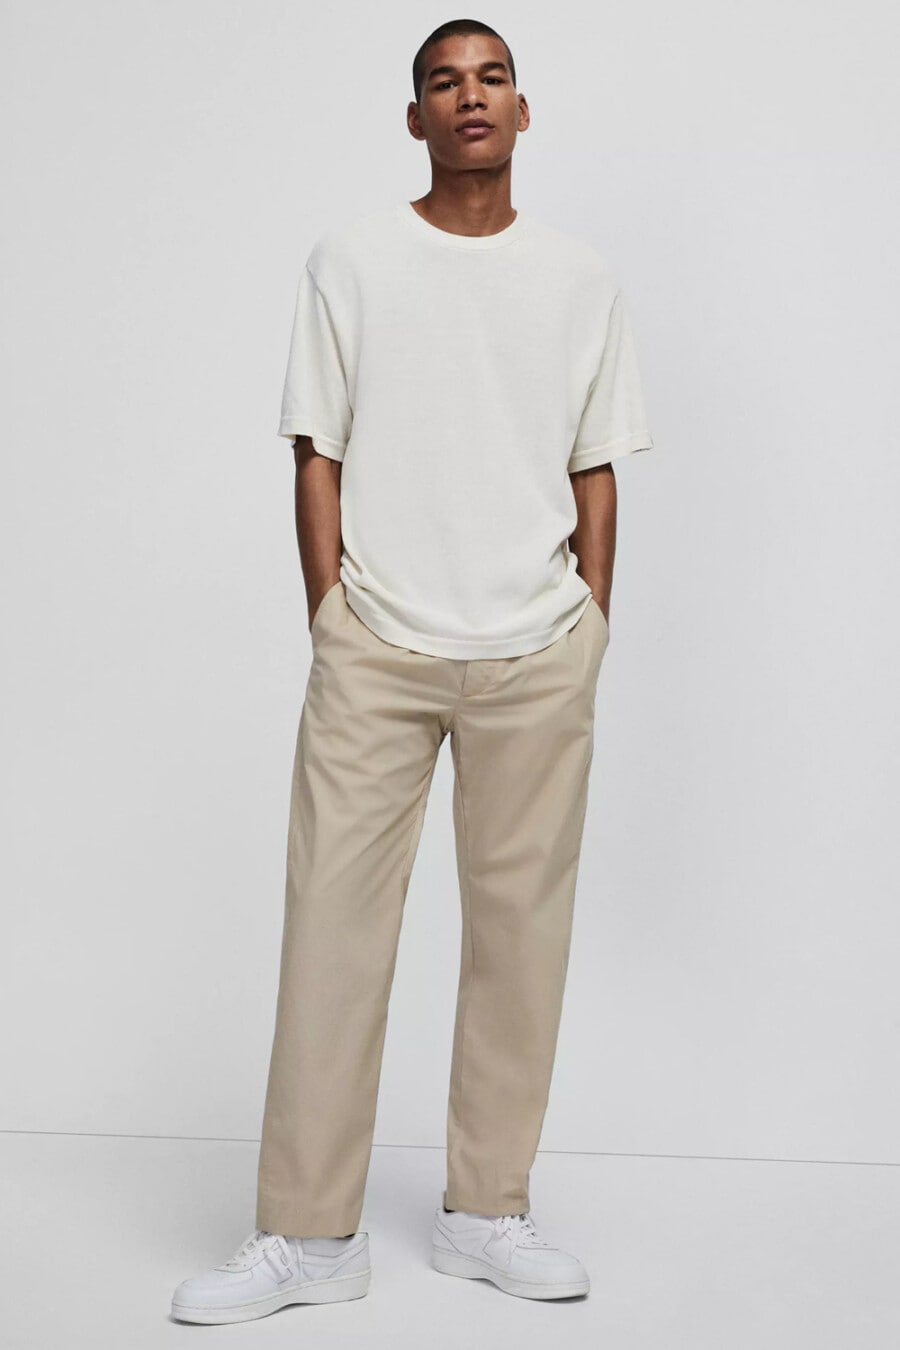 Men's wide-leg beige chinos, slouchy oversized white T-shirt and chunky white sneakers outfit